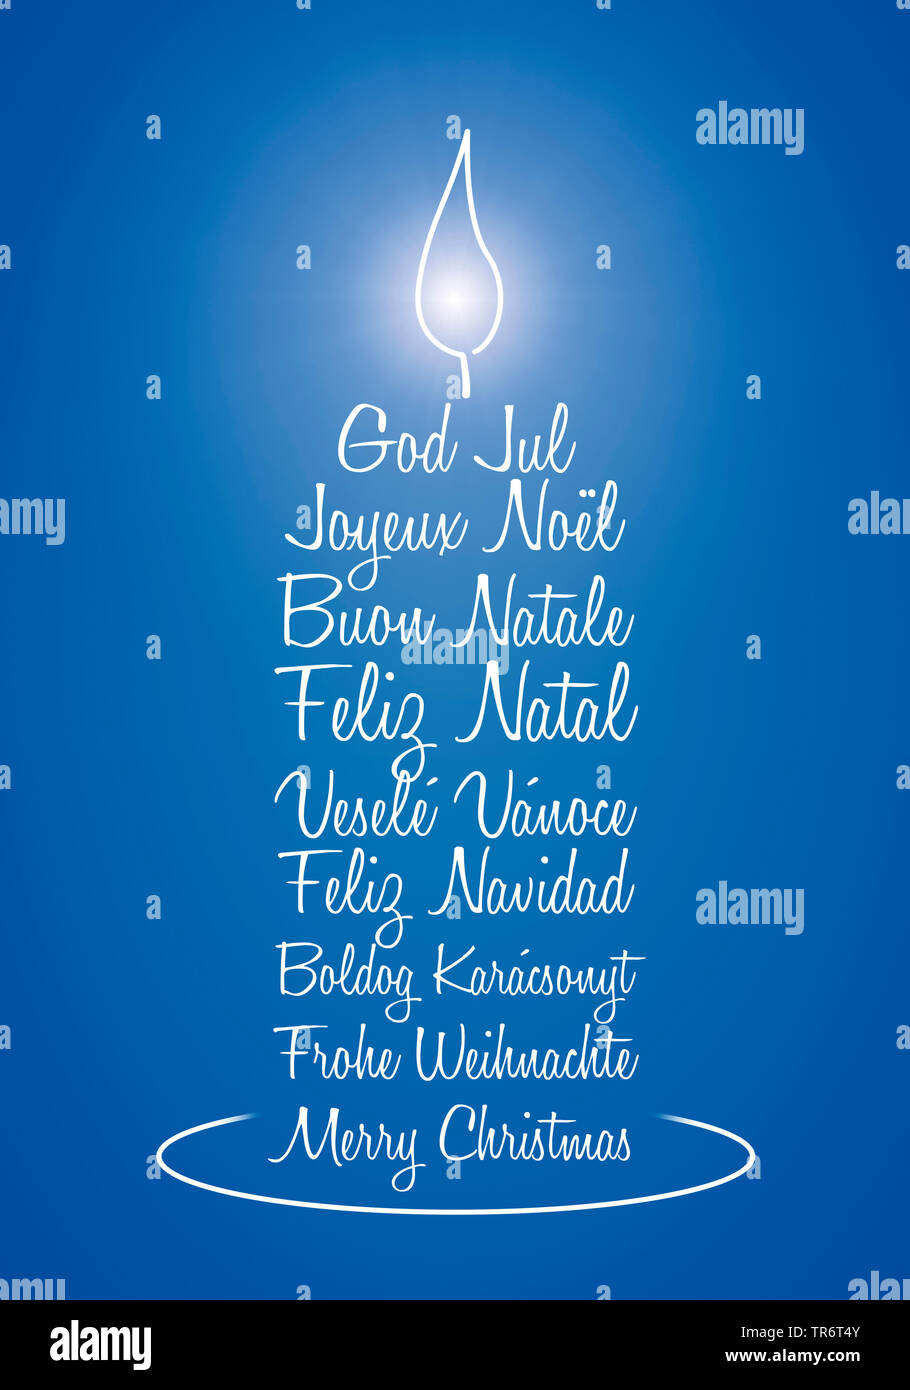 merry christmas card with greetings in different languages in candle shape, computer graphik Stock Photo